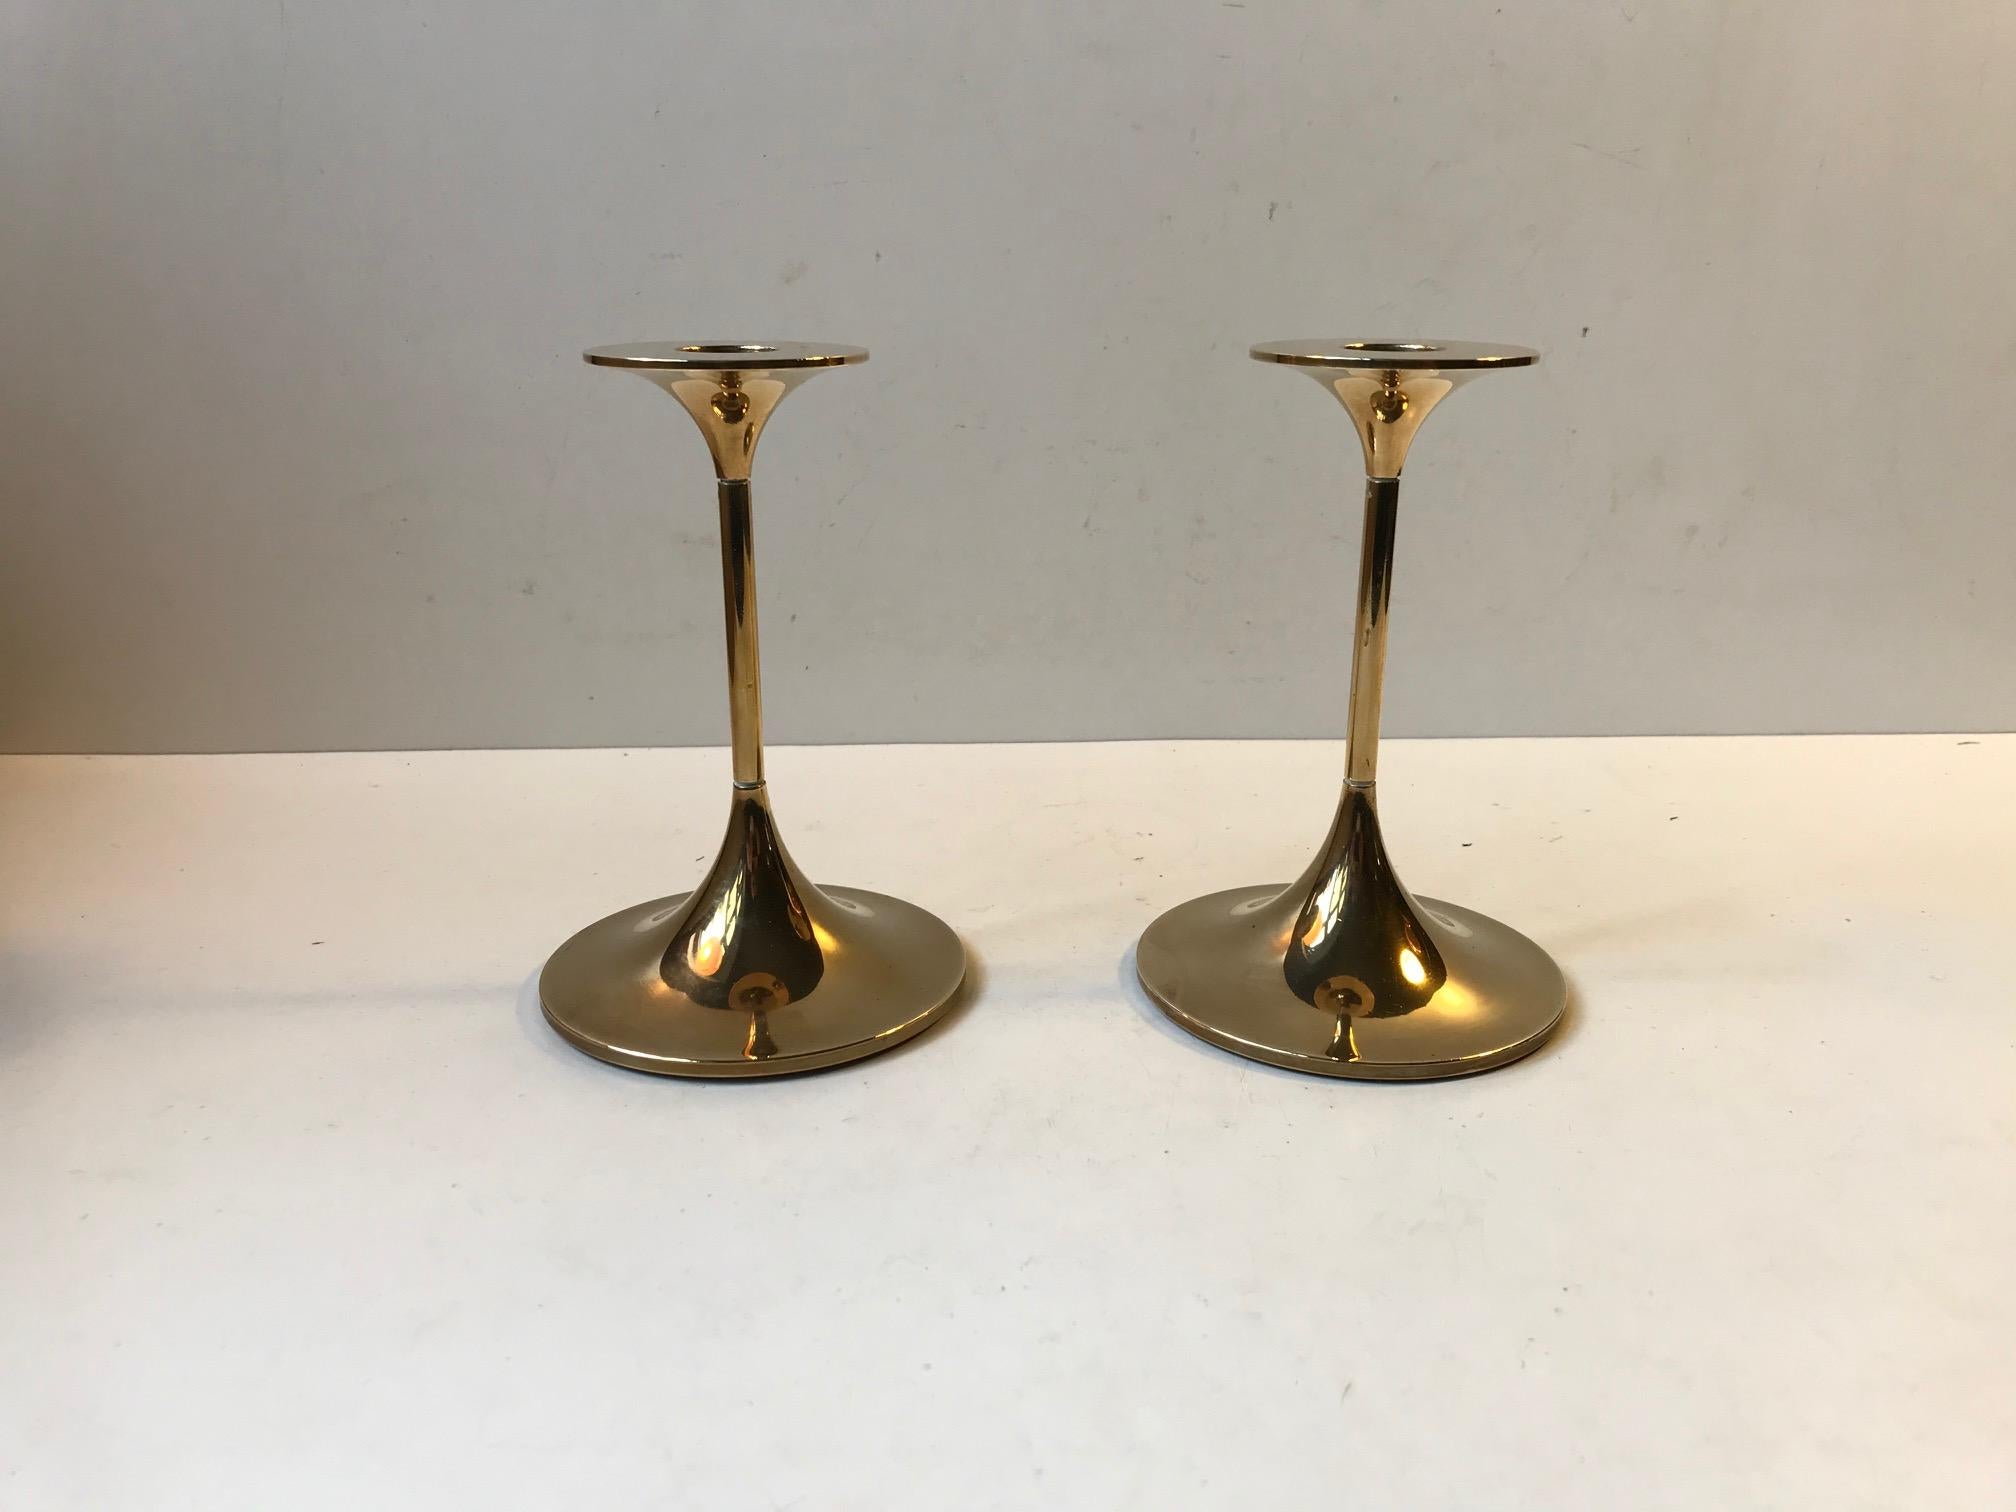 Mid-20th Century Danish Modern Brass Candlesticks 'Hi-Fi' by Max Brüel for Torben Orskov, 1960s For Sale